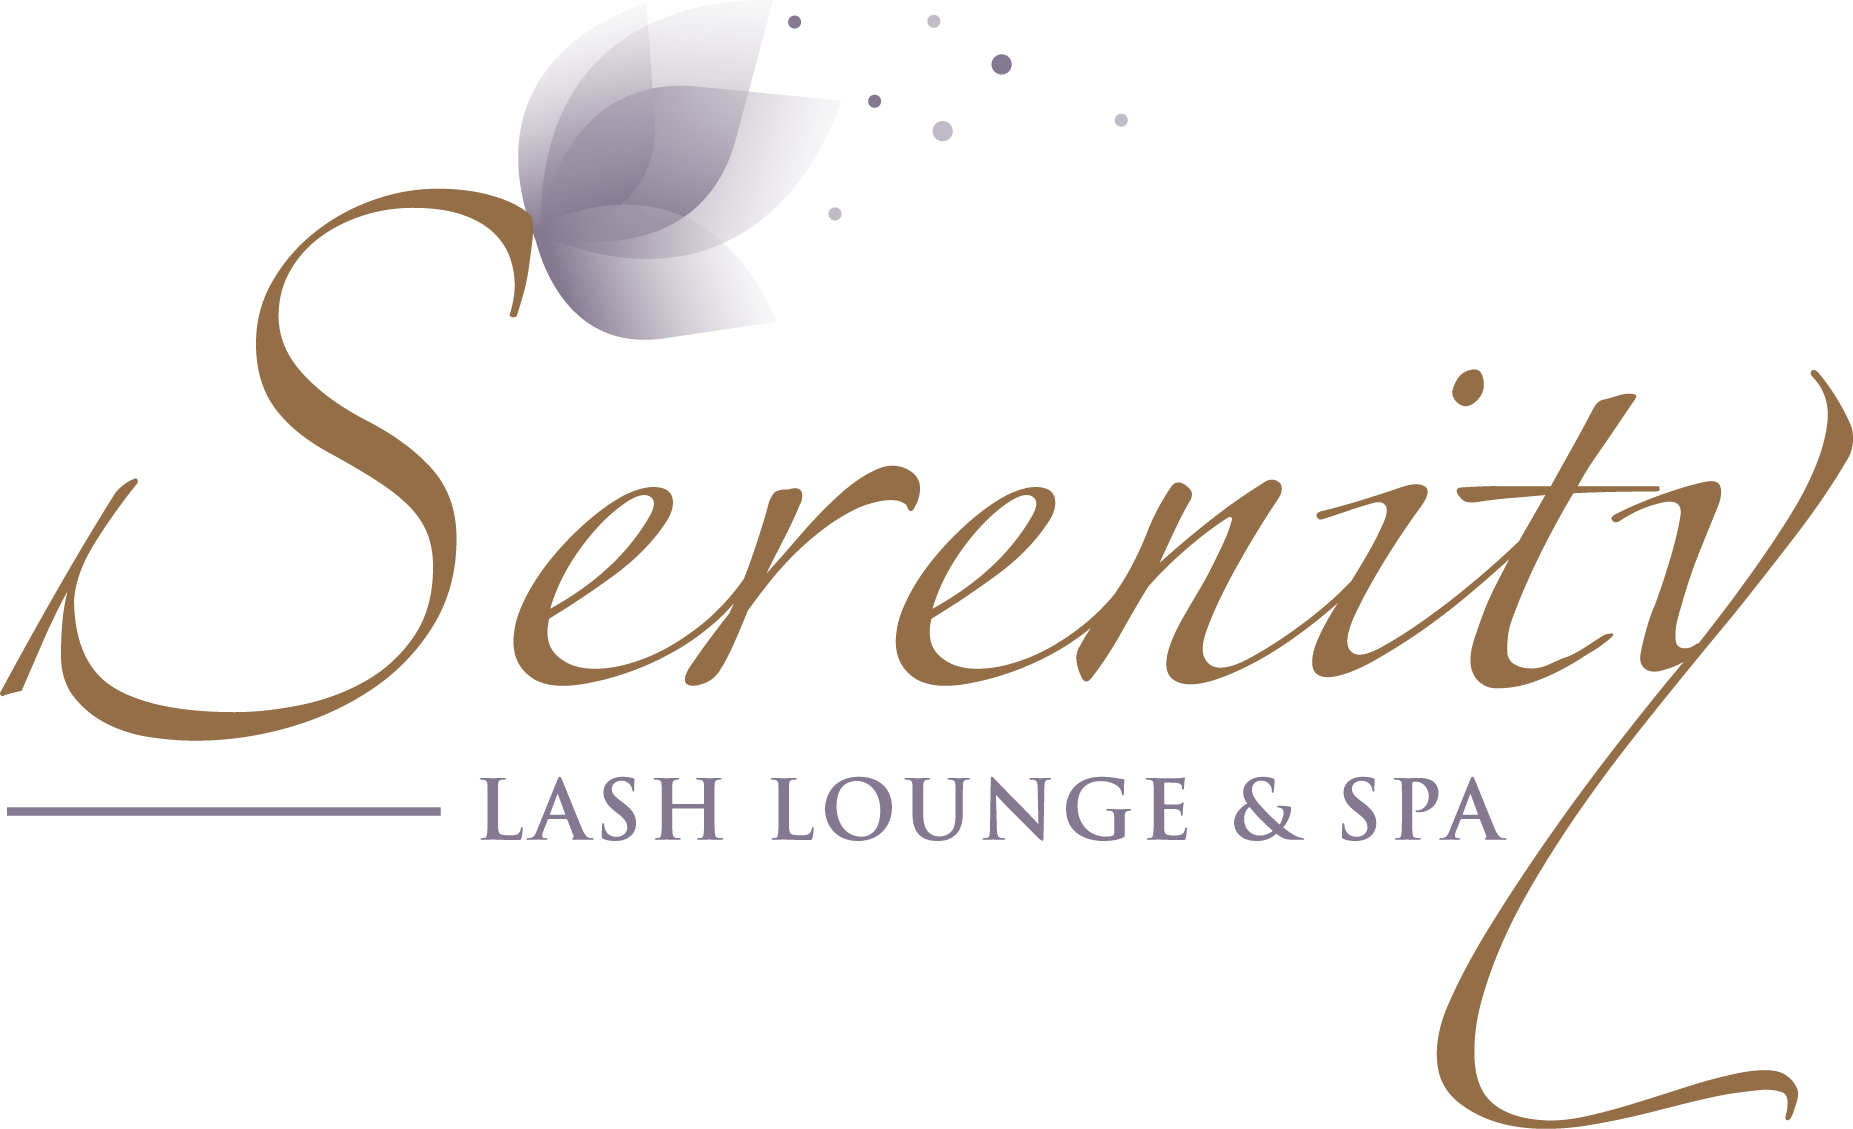 Serenity Lash Loungeand Spa Logo PNG